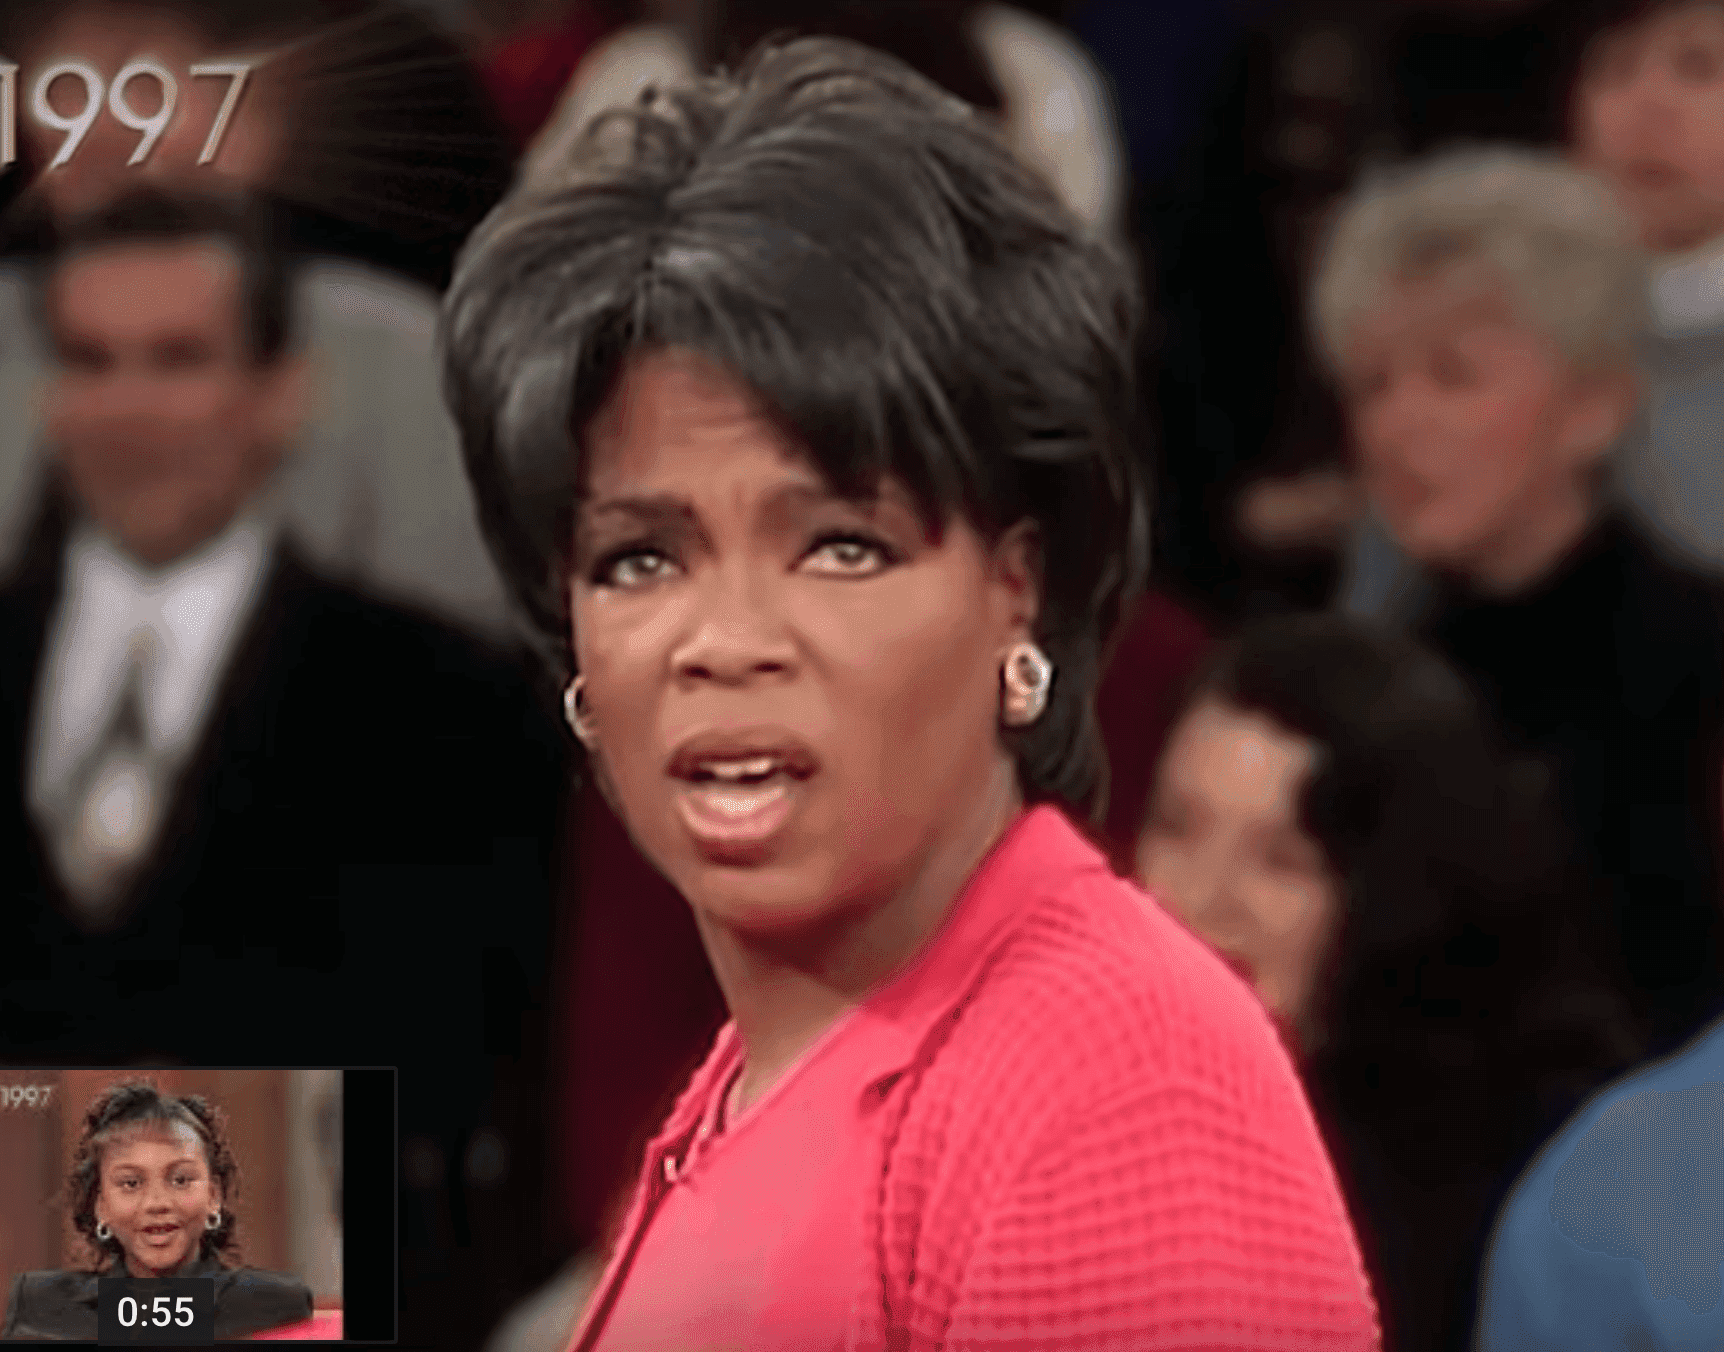 A surprised Oprah during "The Oprah Winfrey Show" while hearing Jamie's full name | Source: YouTube/OWN